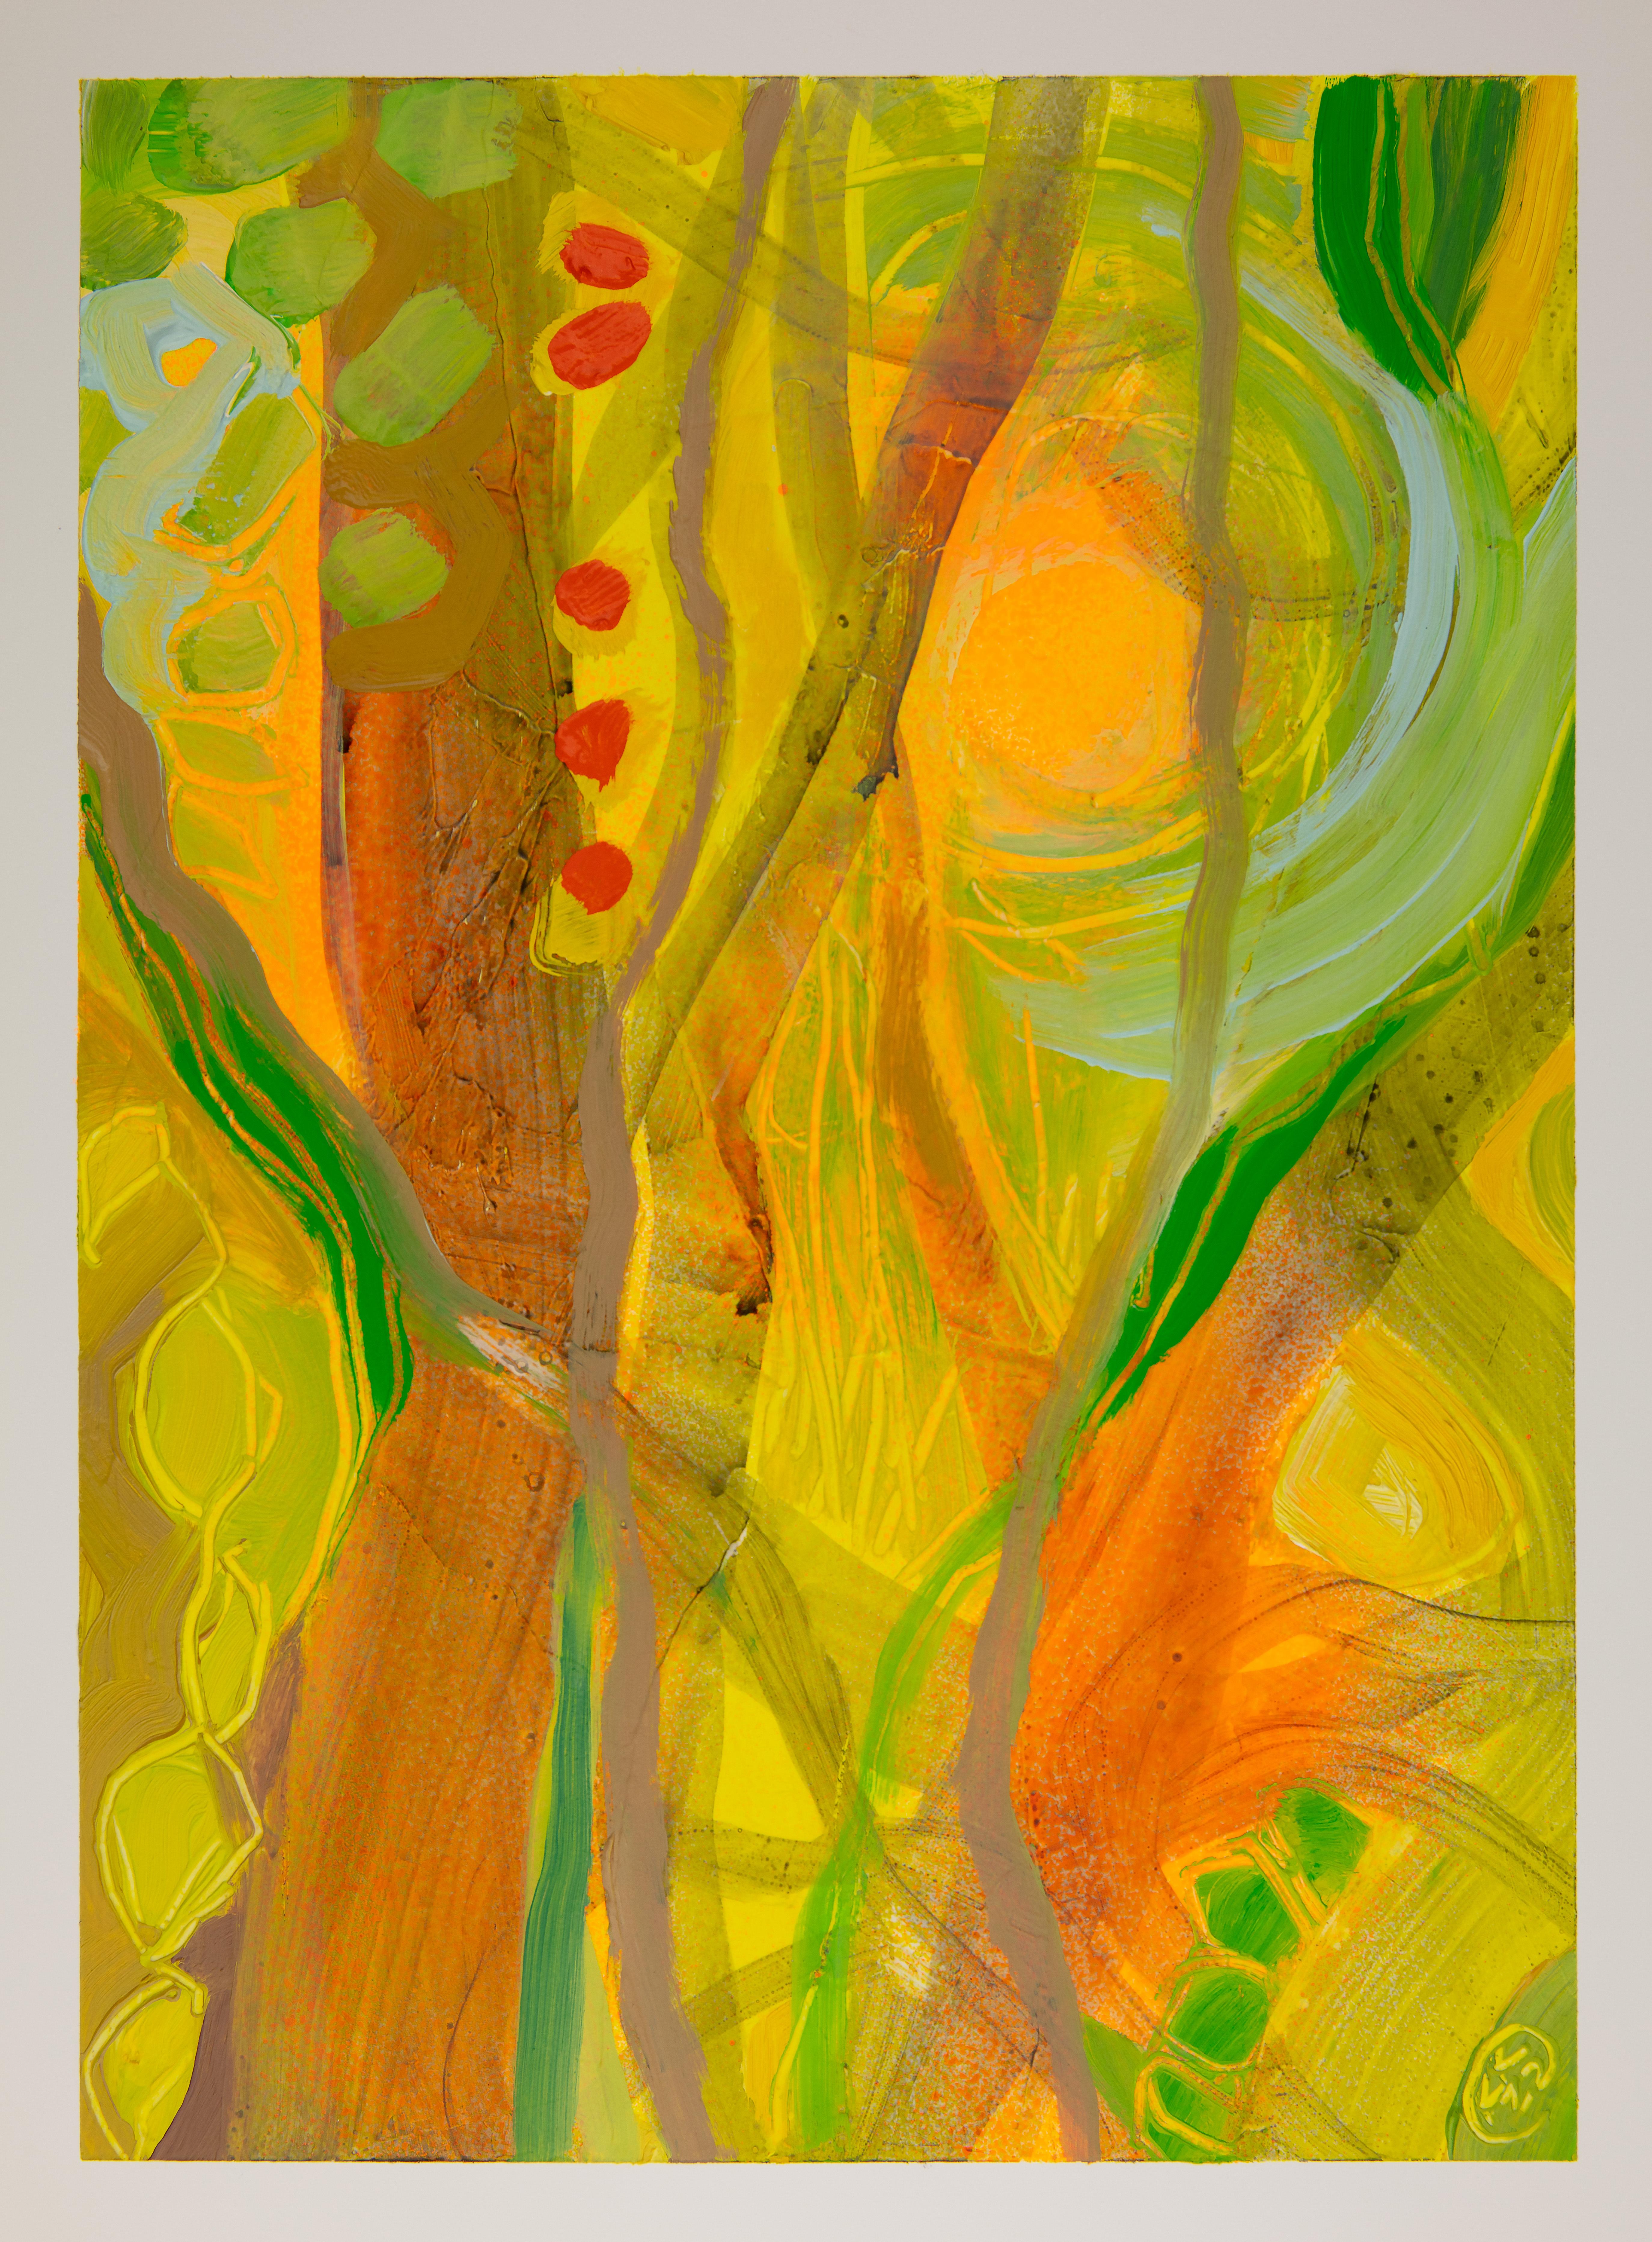 Botanical IV, bright green and orange abstract plants, surreal scene